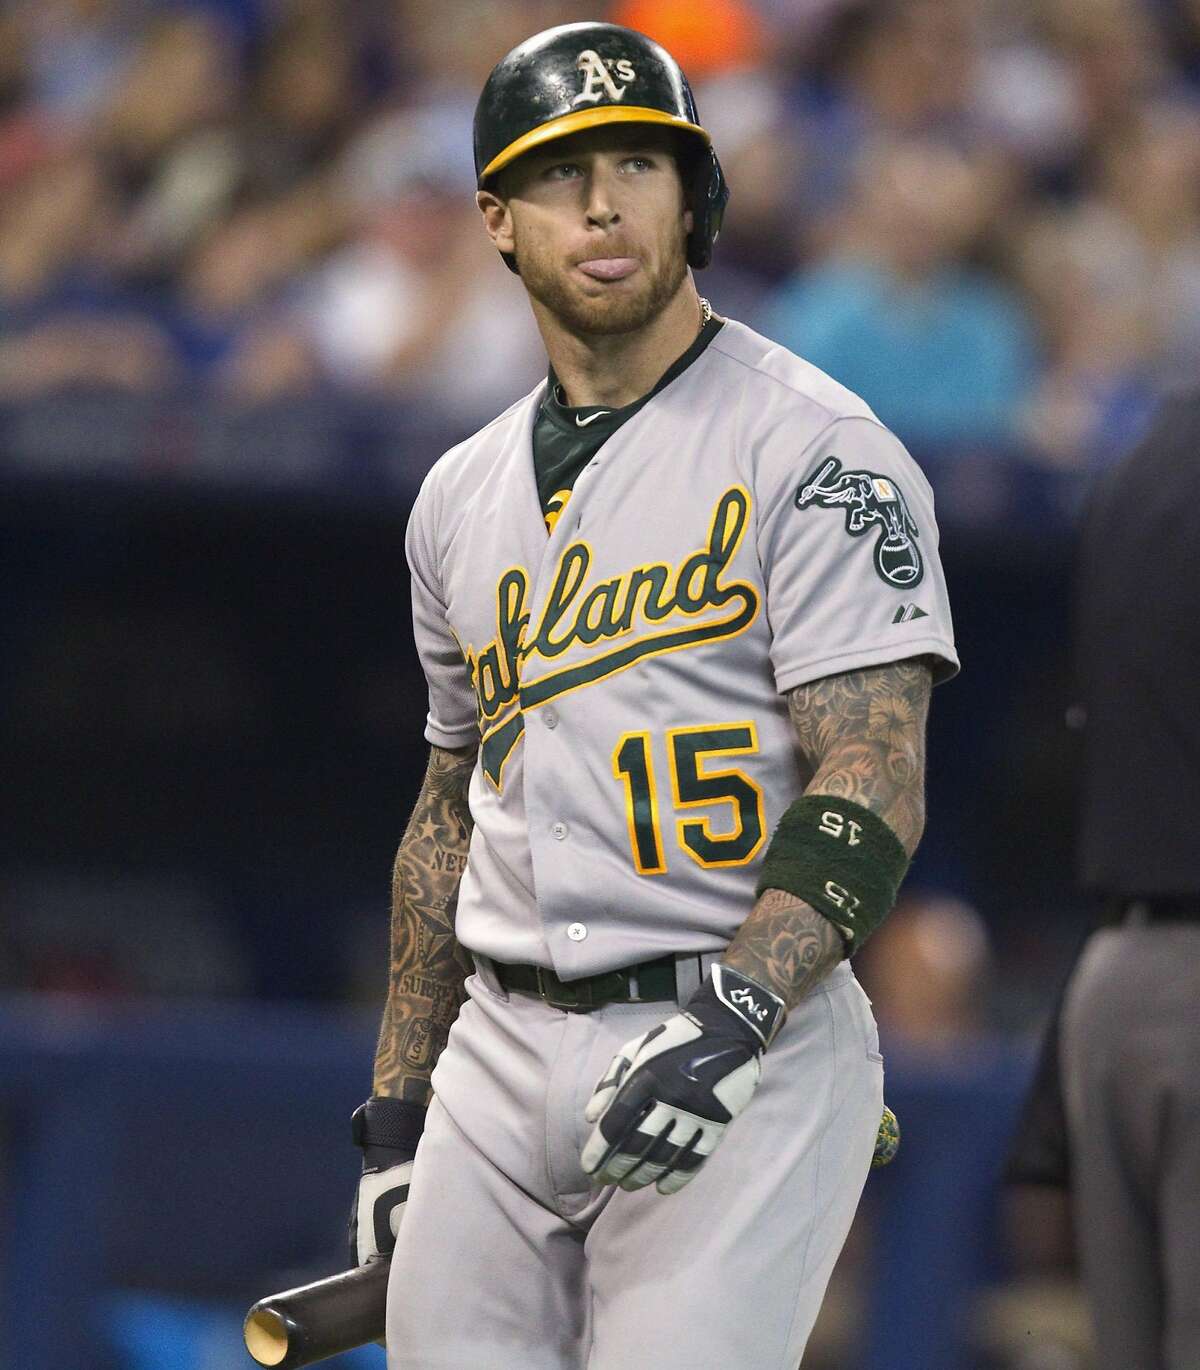 Oakland Athletics' Brett Lawrie reacts after striking out during the seventh inning against the Toronto Blue Jays in a baseball game Tuesday, Aug. 11, 2015, in Toronto. Toronto won 4-2. (Fred Thornhill/The Canadian Press via AP)